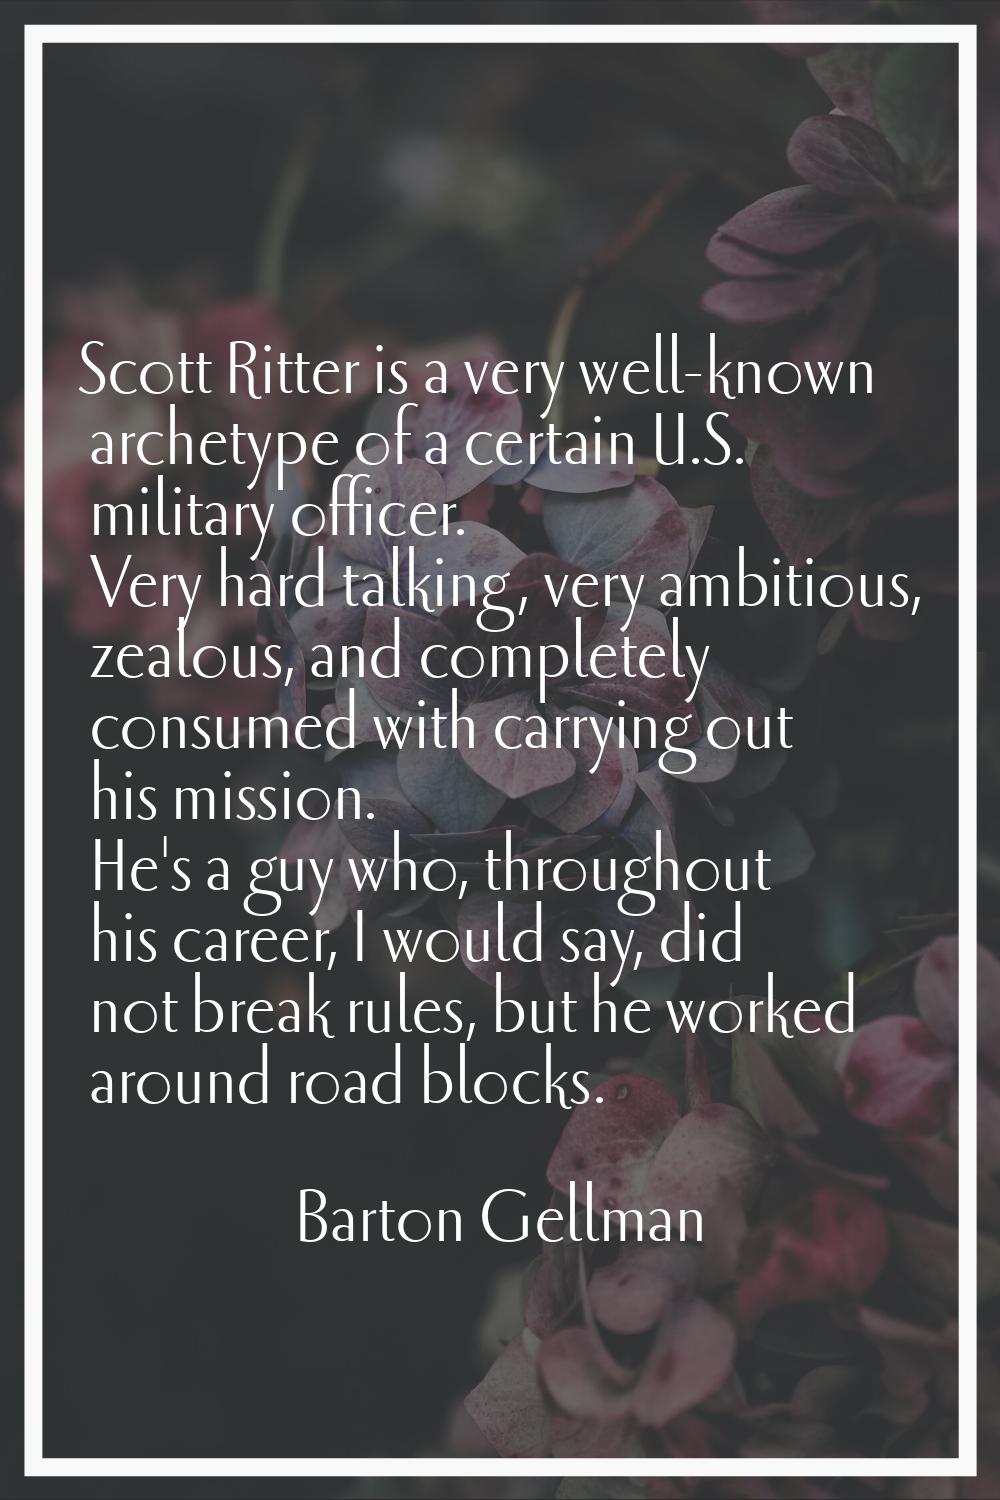 Scott Ritter is a very well-known archetype of a certain U.S. military officer. Very hard talking, 